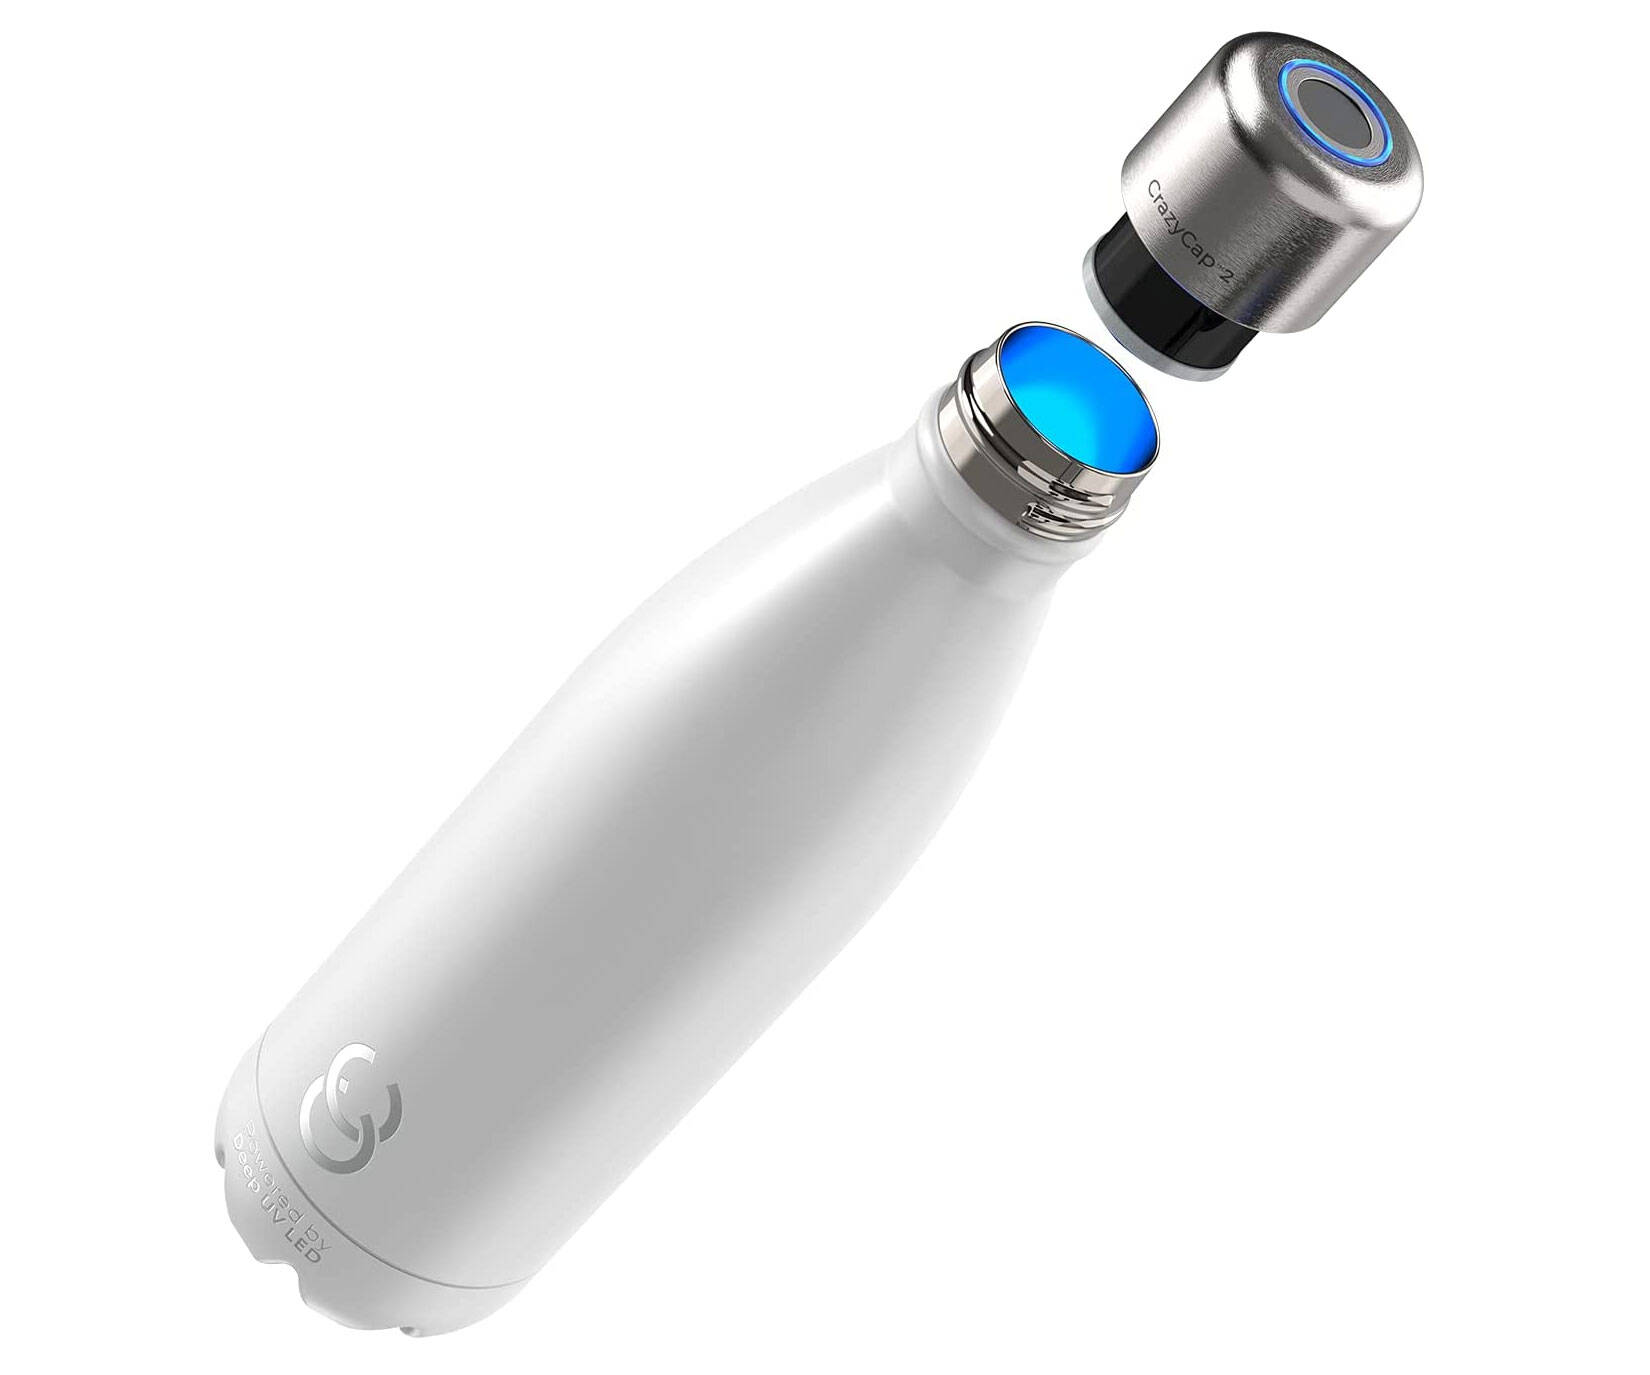 CrazyCap UV Self-Cleaning Water Bottle - coolthings.us